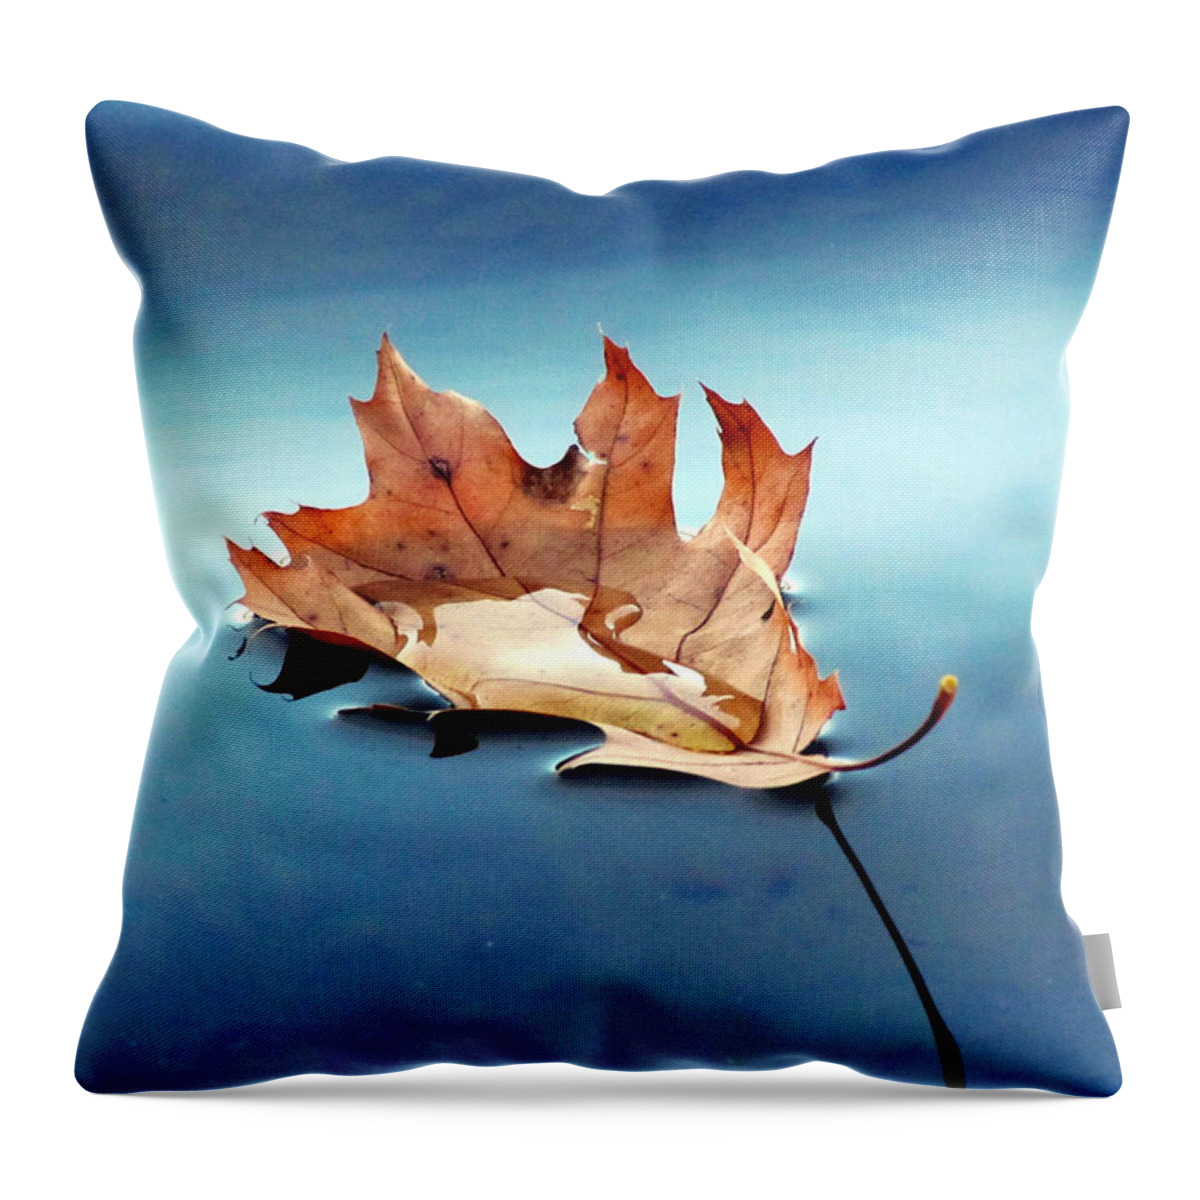 Leaf Throw Pillow featuring the photograph Floating Oak Leaf by David T Wilkinson